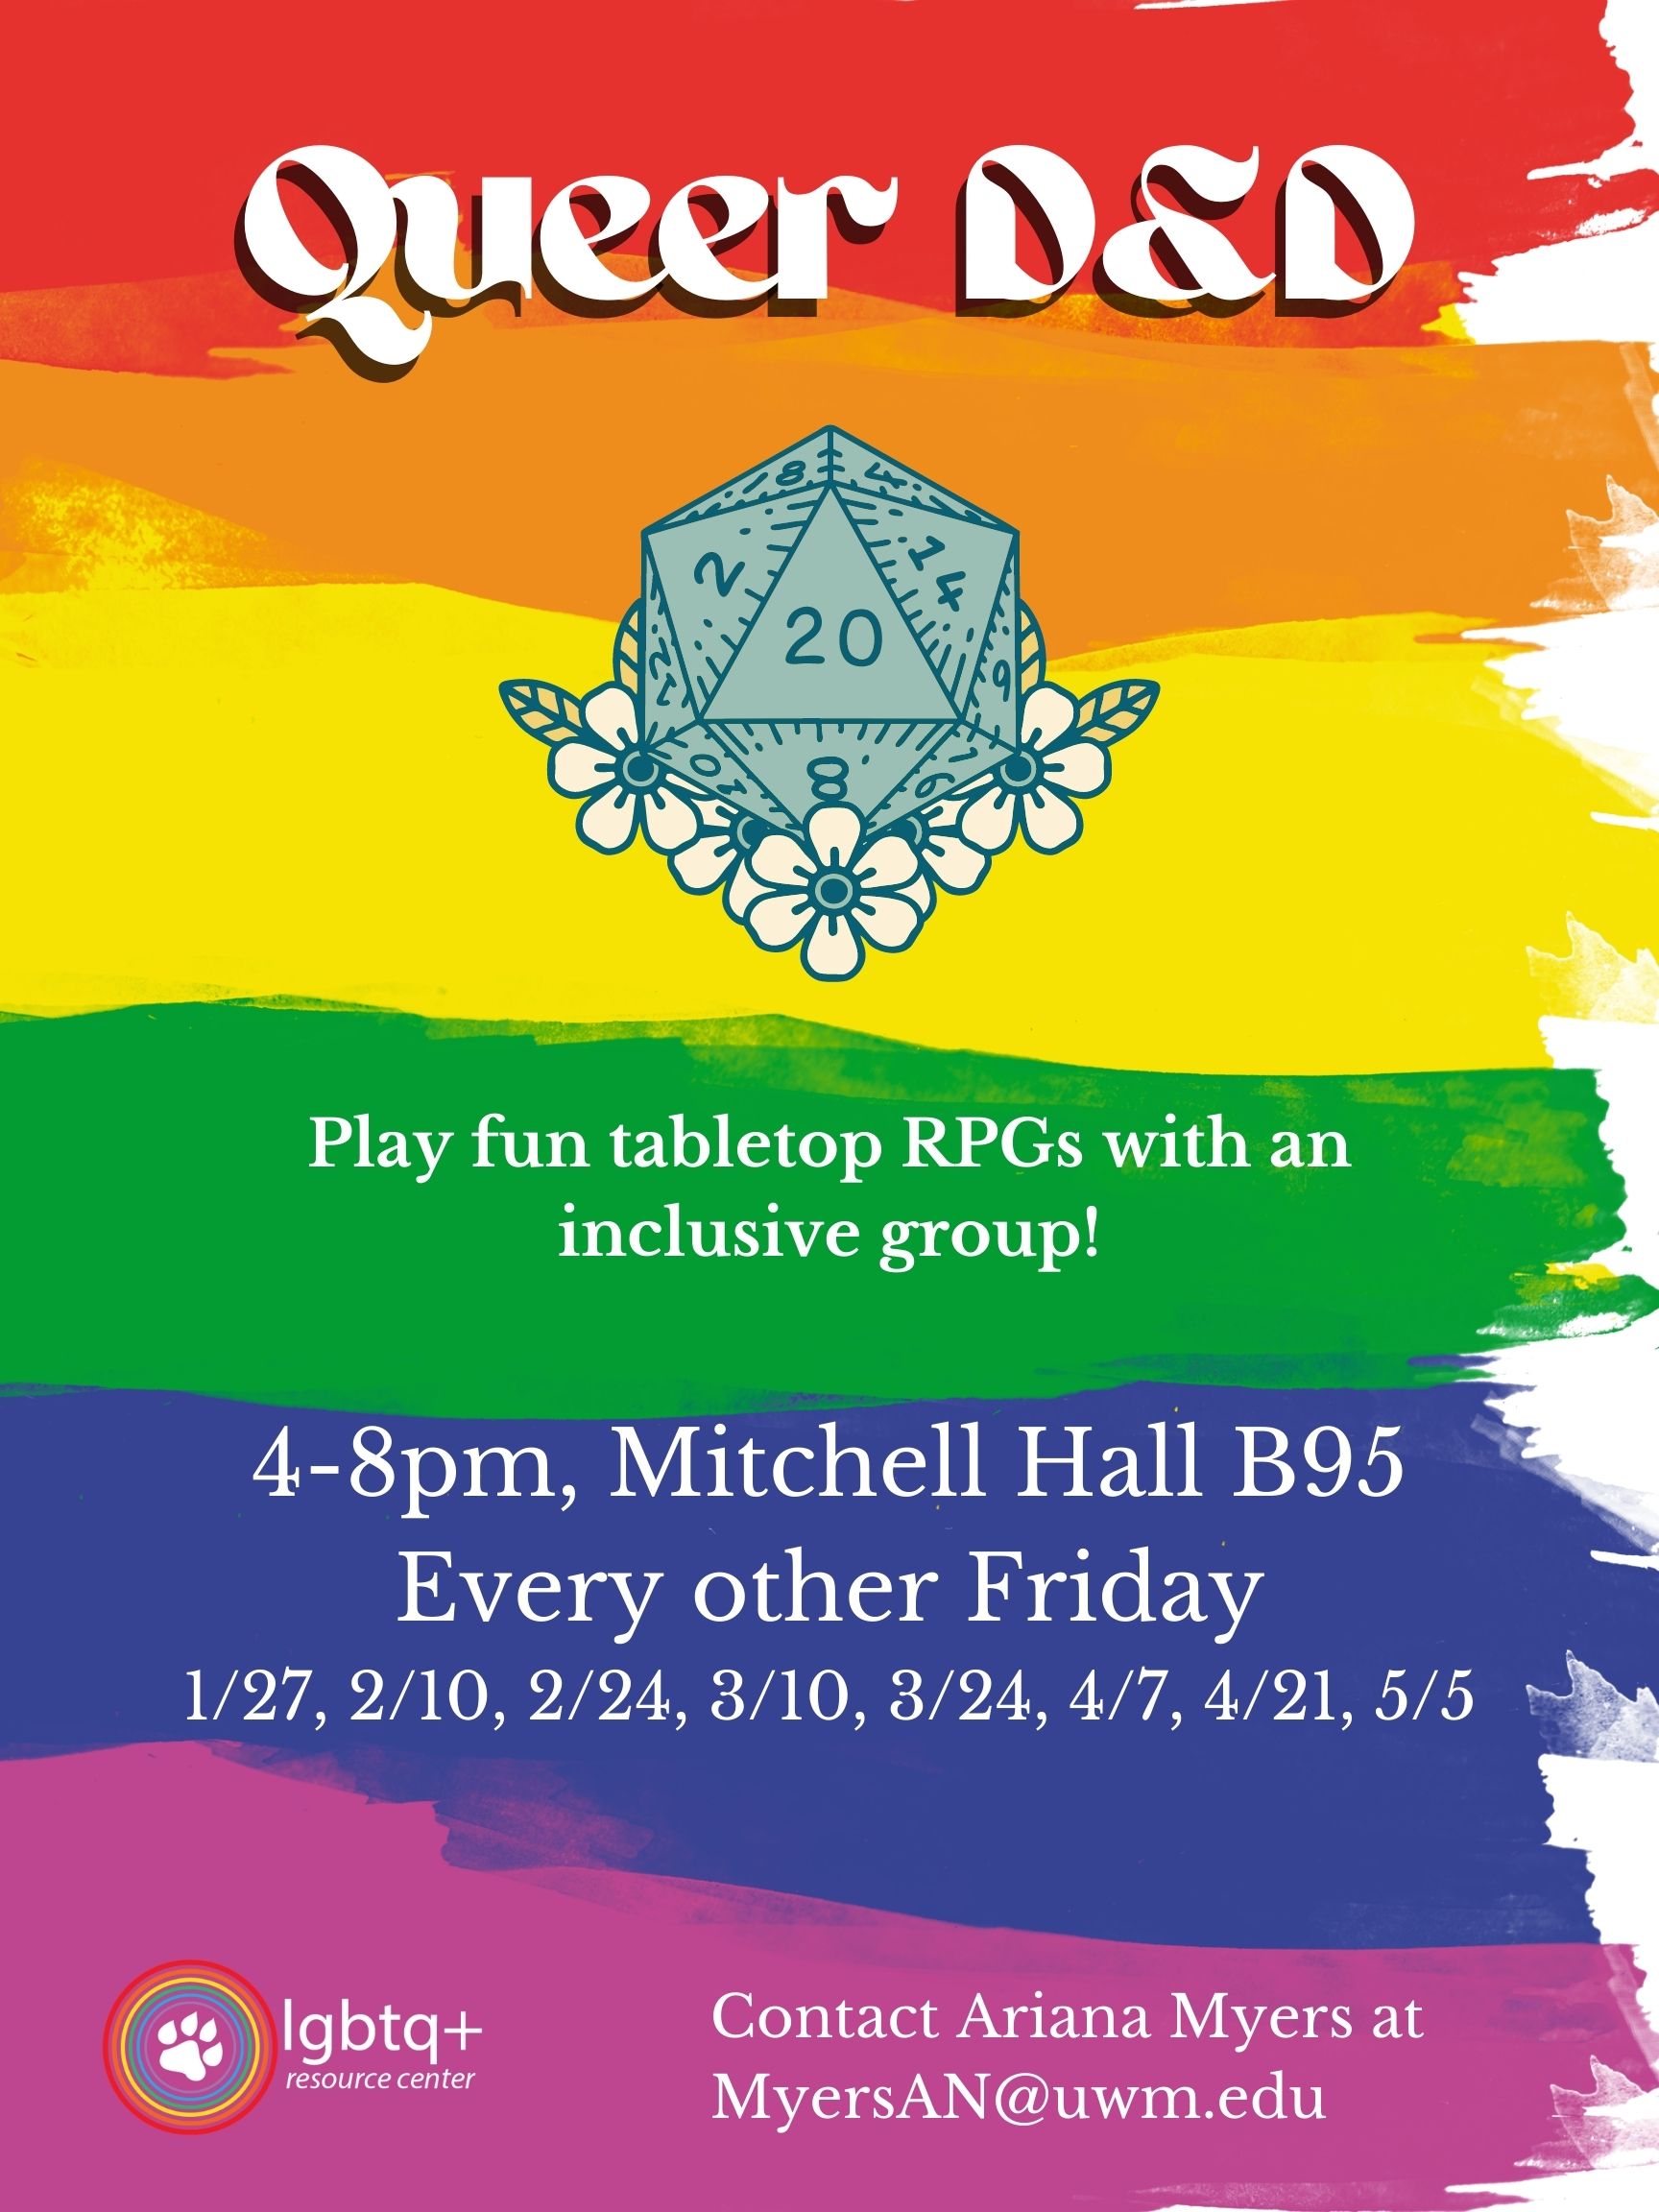 Details For Event 23454 – Queer DND